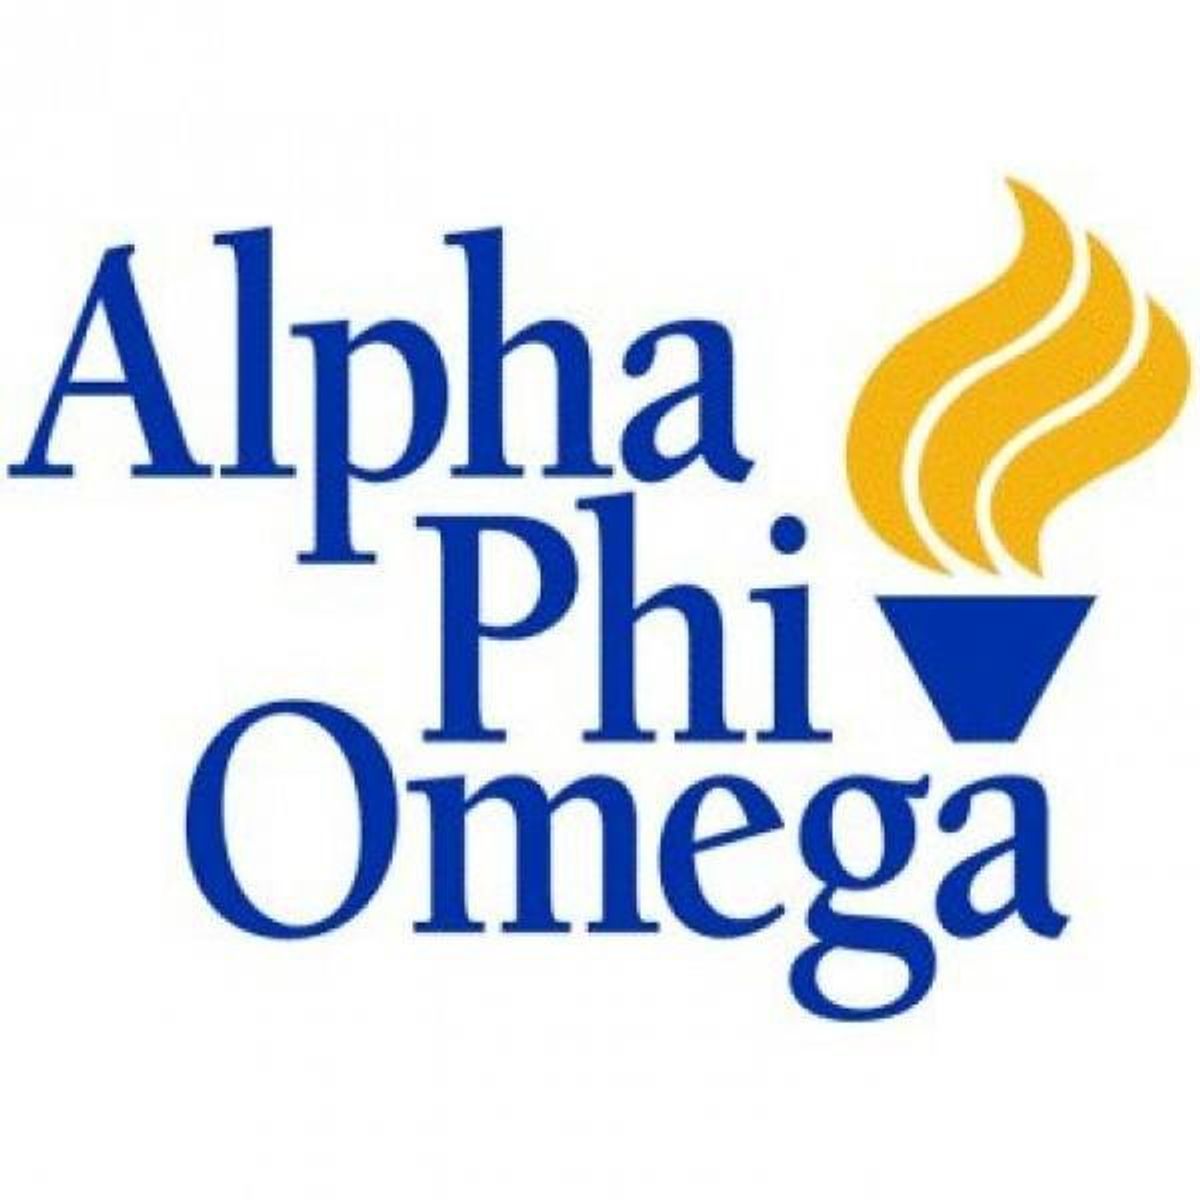 A Thank You Letter To Alpha Phi Omega